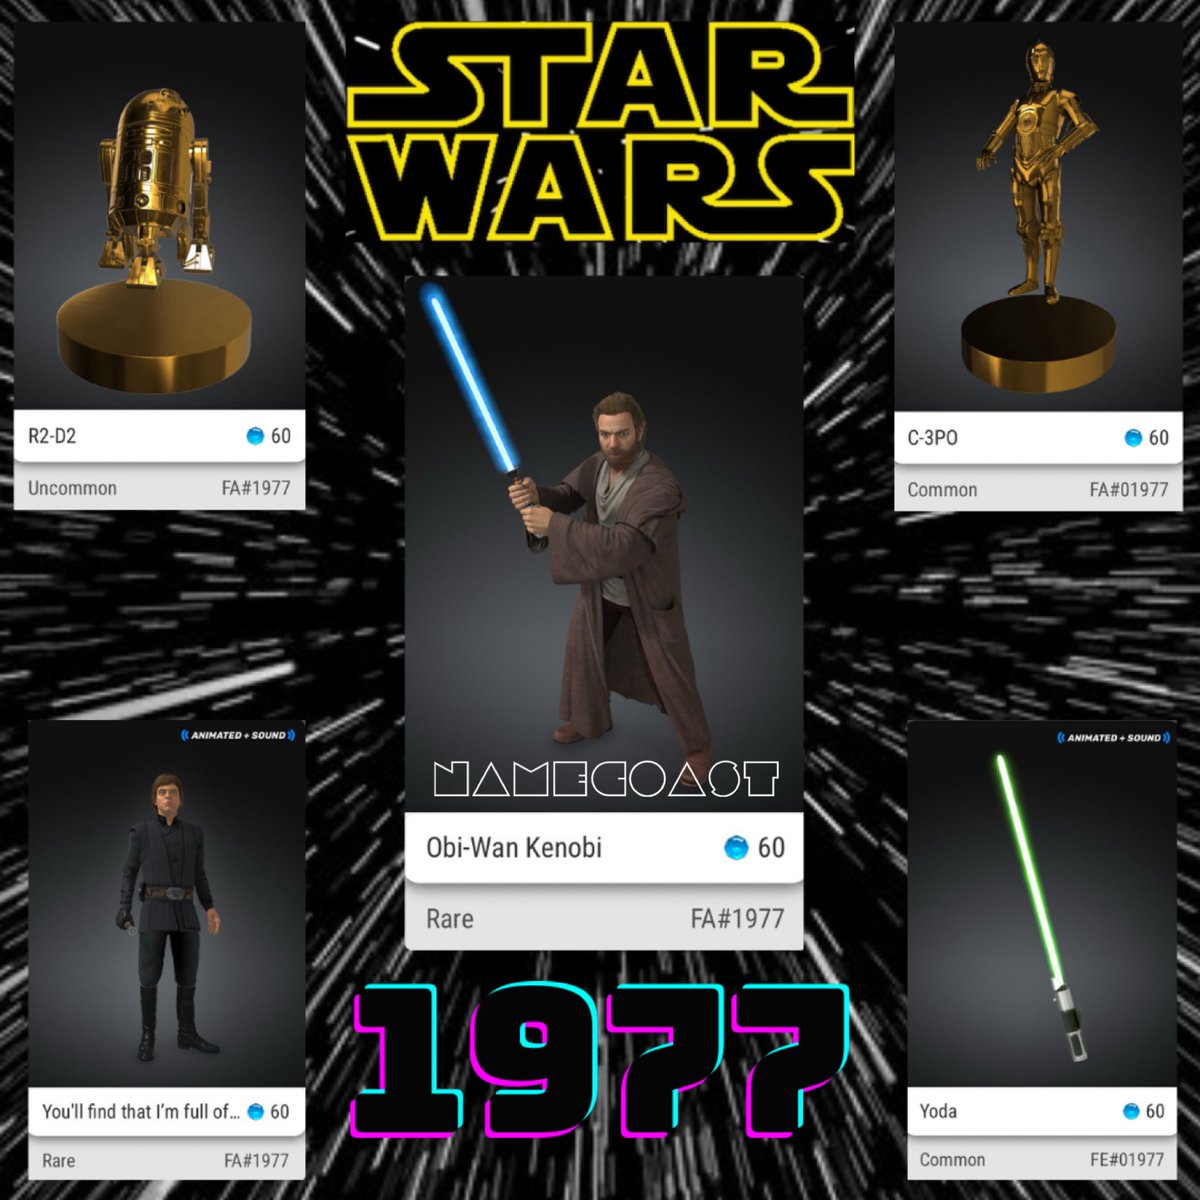 I let’s get May Rocking @veve_official give us what we need! 💙🤍💙🤍 I’ll start it off!! WE’VE BEEN EXPECTING MASTER KENOBI…… Welcome home 1977 Obi Wan. Special thanks to @DG_343 @starwars @Disney @DavidYuNZ @ComicsandCrypto @Ben64CF @MrktSmart @SergioCollects